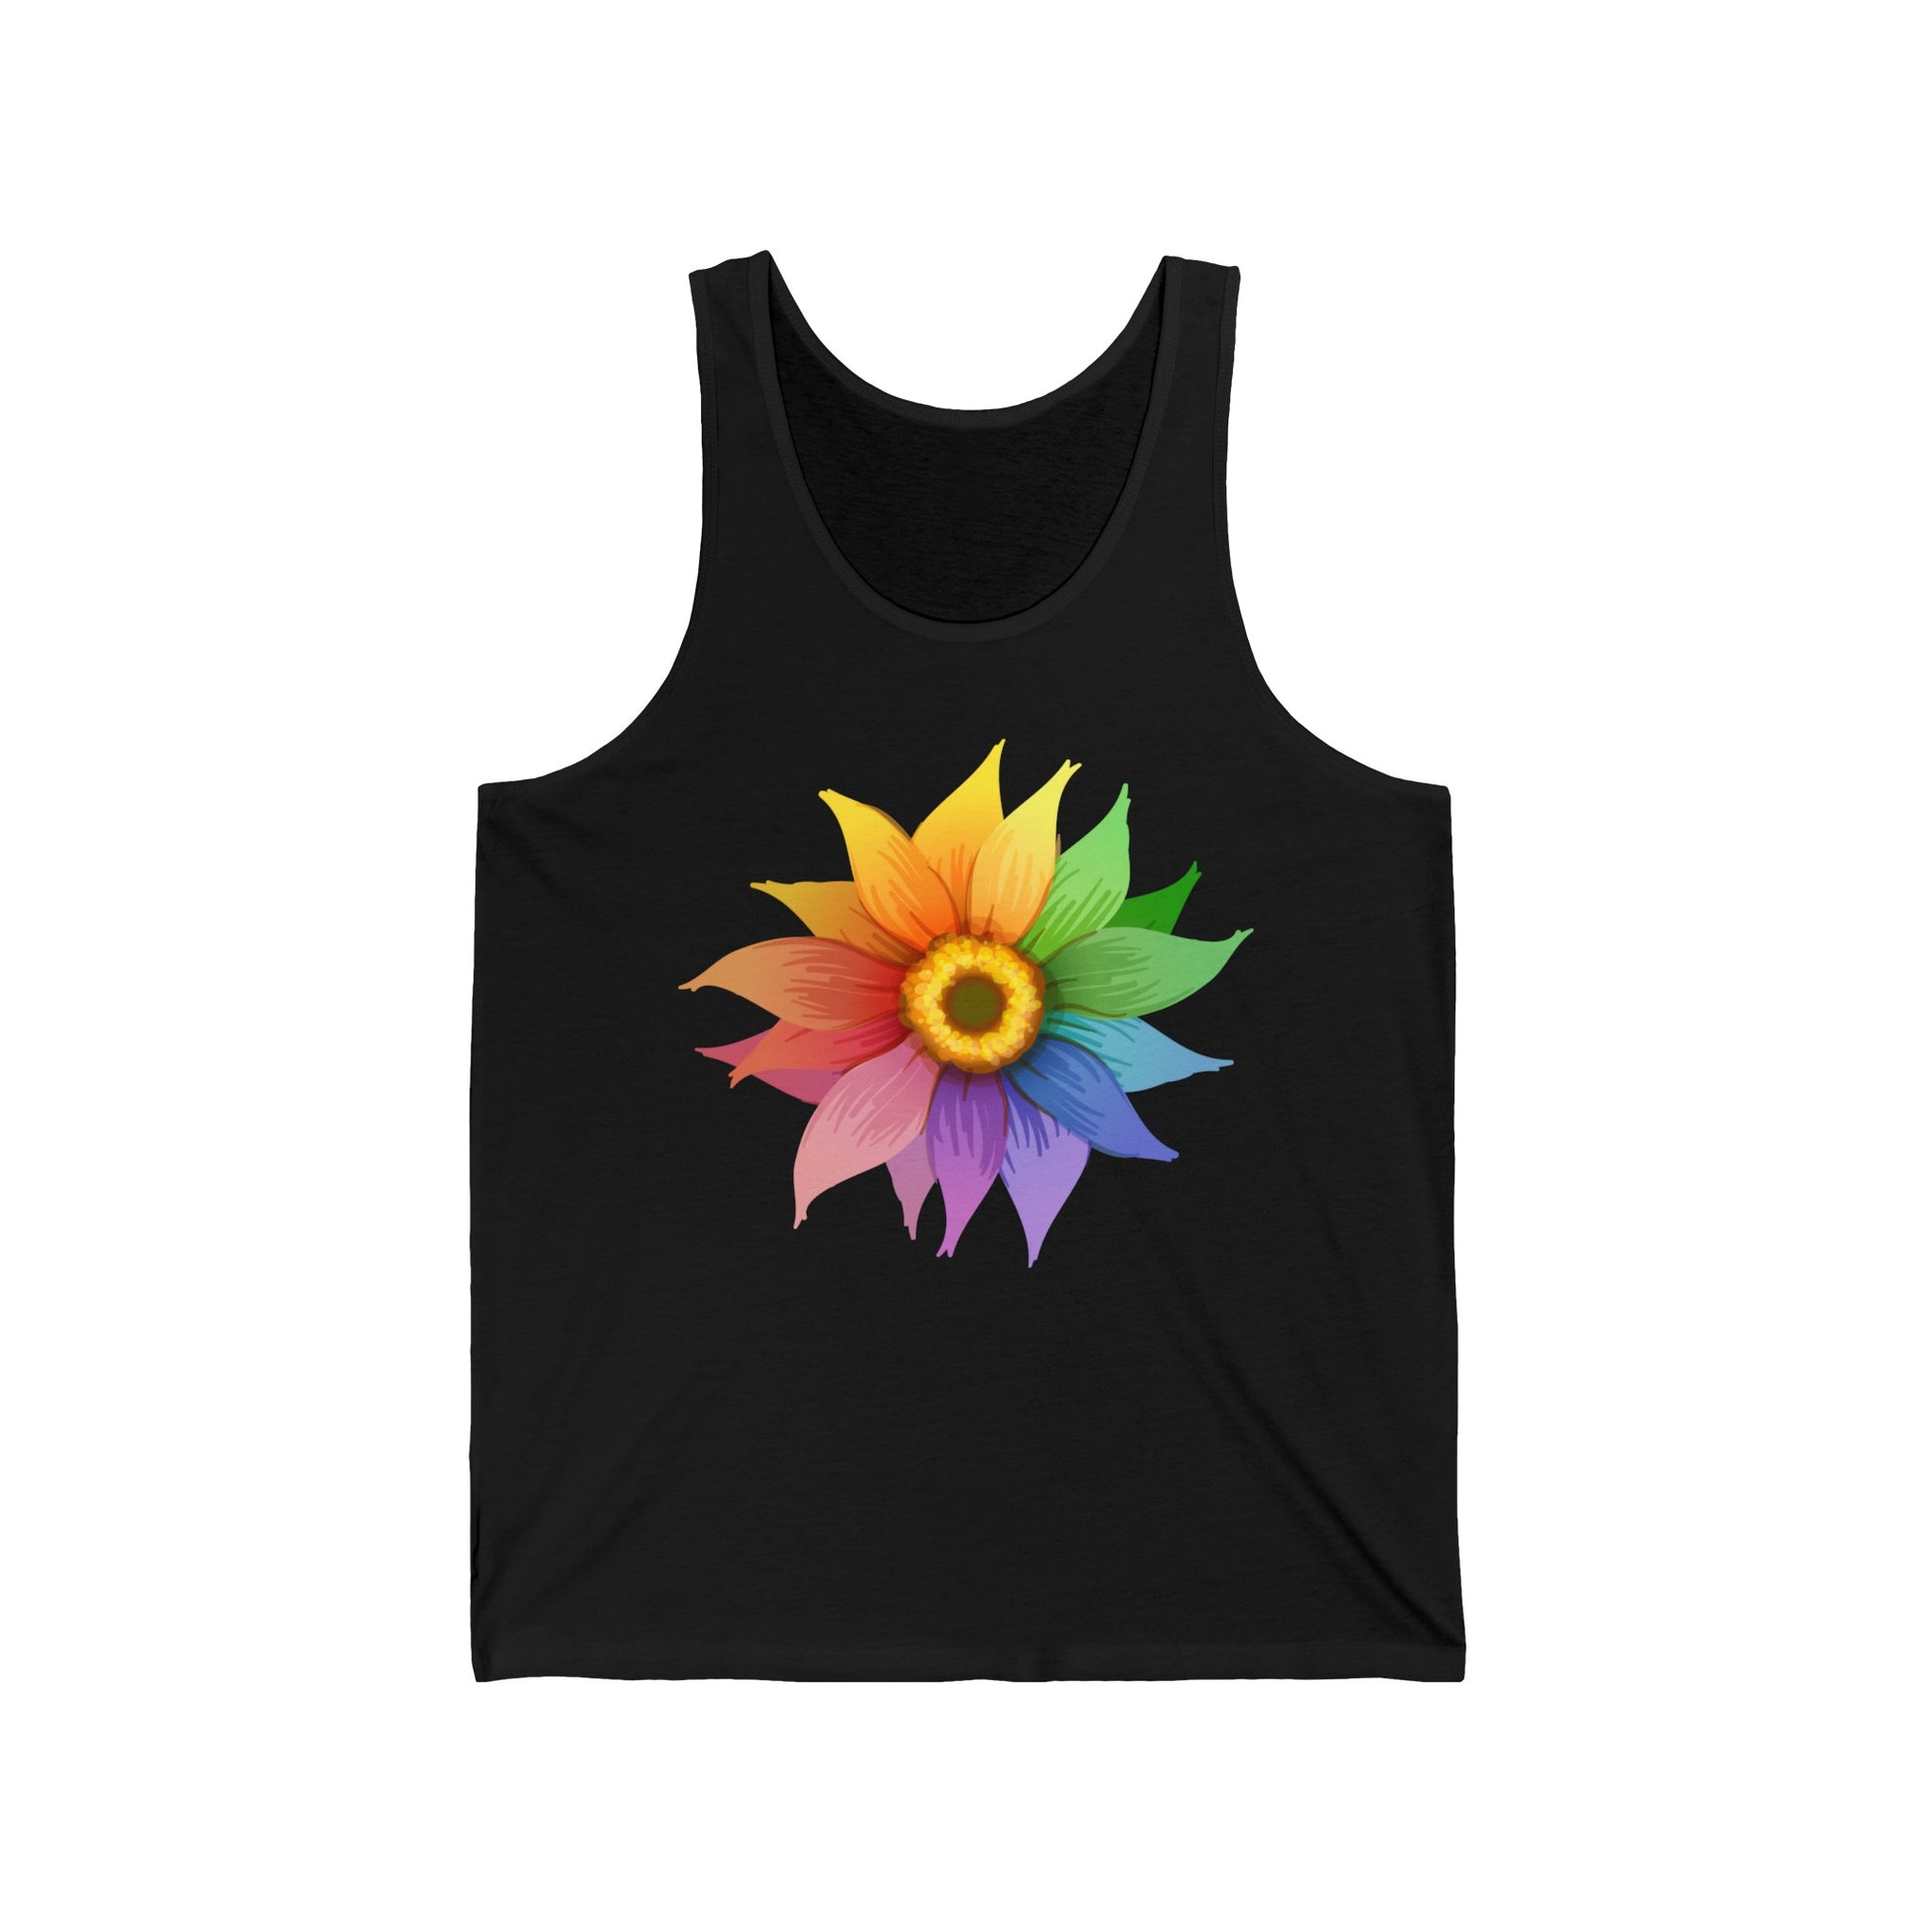 Unisex Rainbow Flower Tank Top - The Inclusive Collective